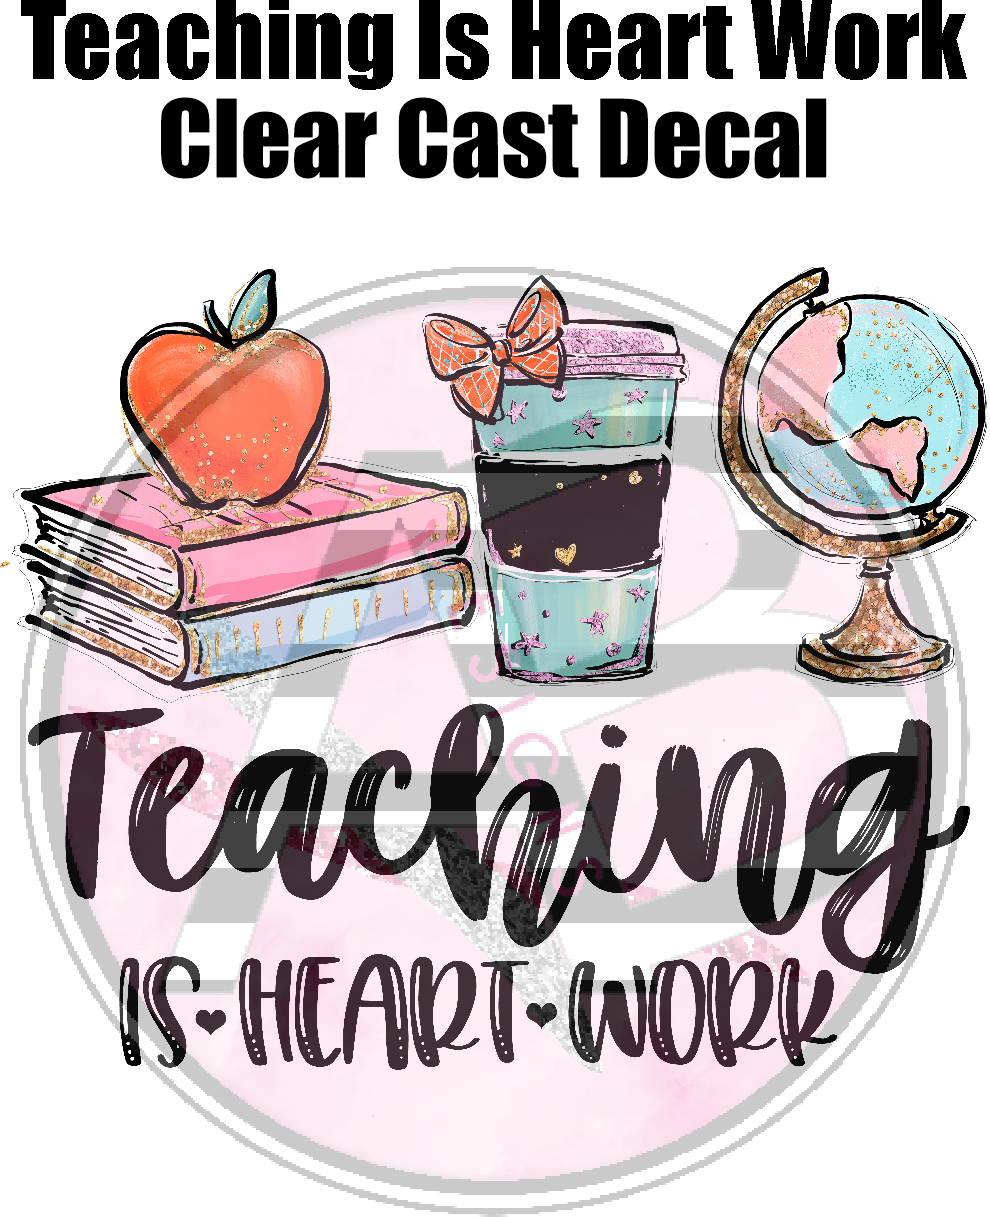 Teaching is Heart Work - Clear Cast Decal